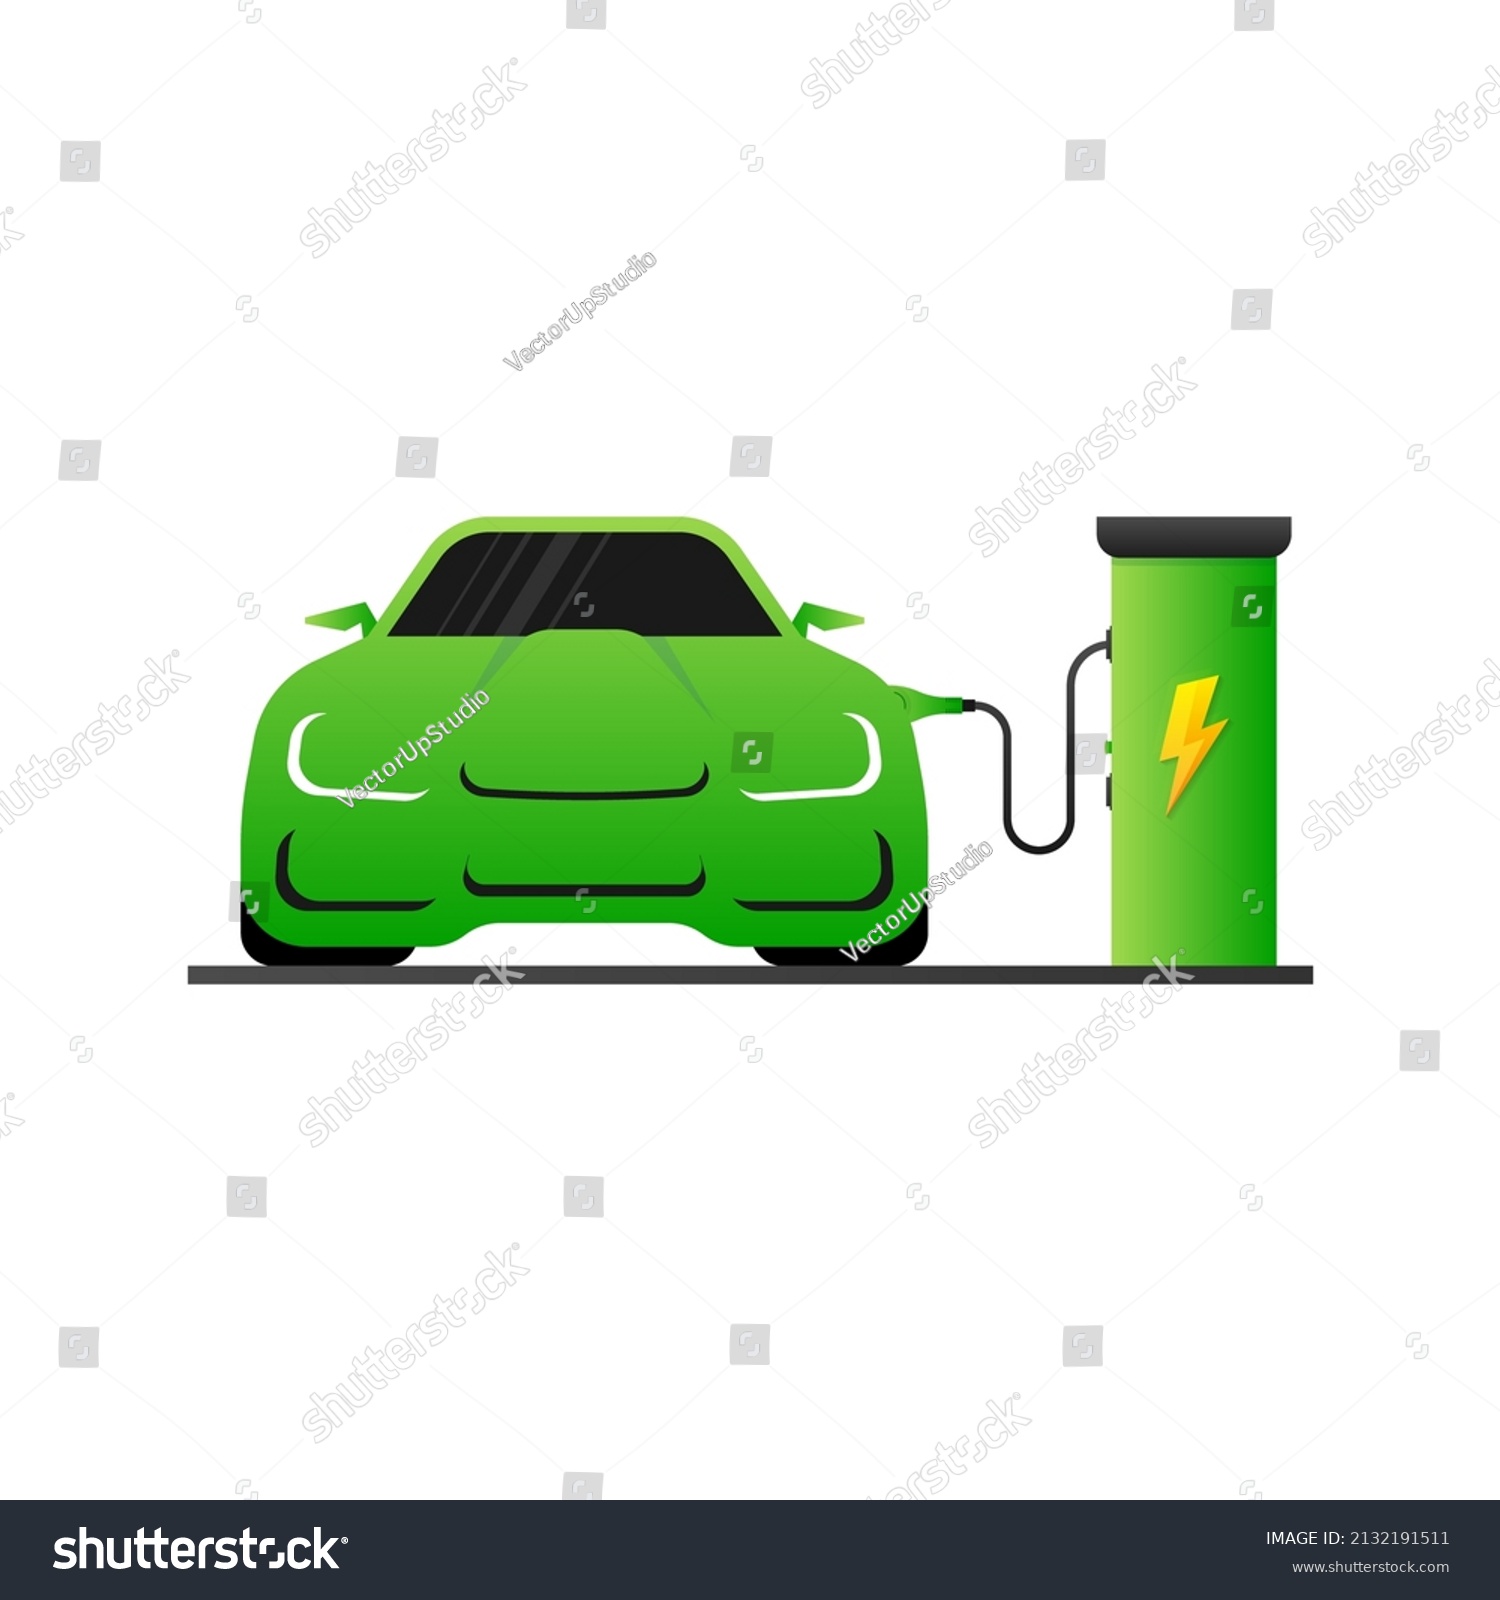 Electric Car Electrical Charging Station Symbol Stock Vector (Royalty ...